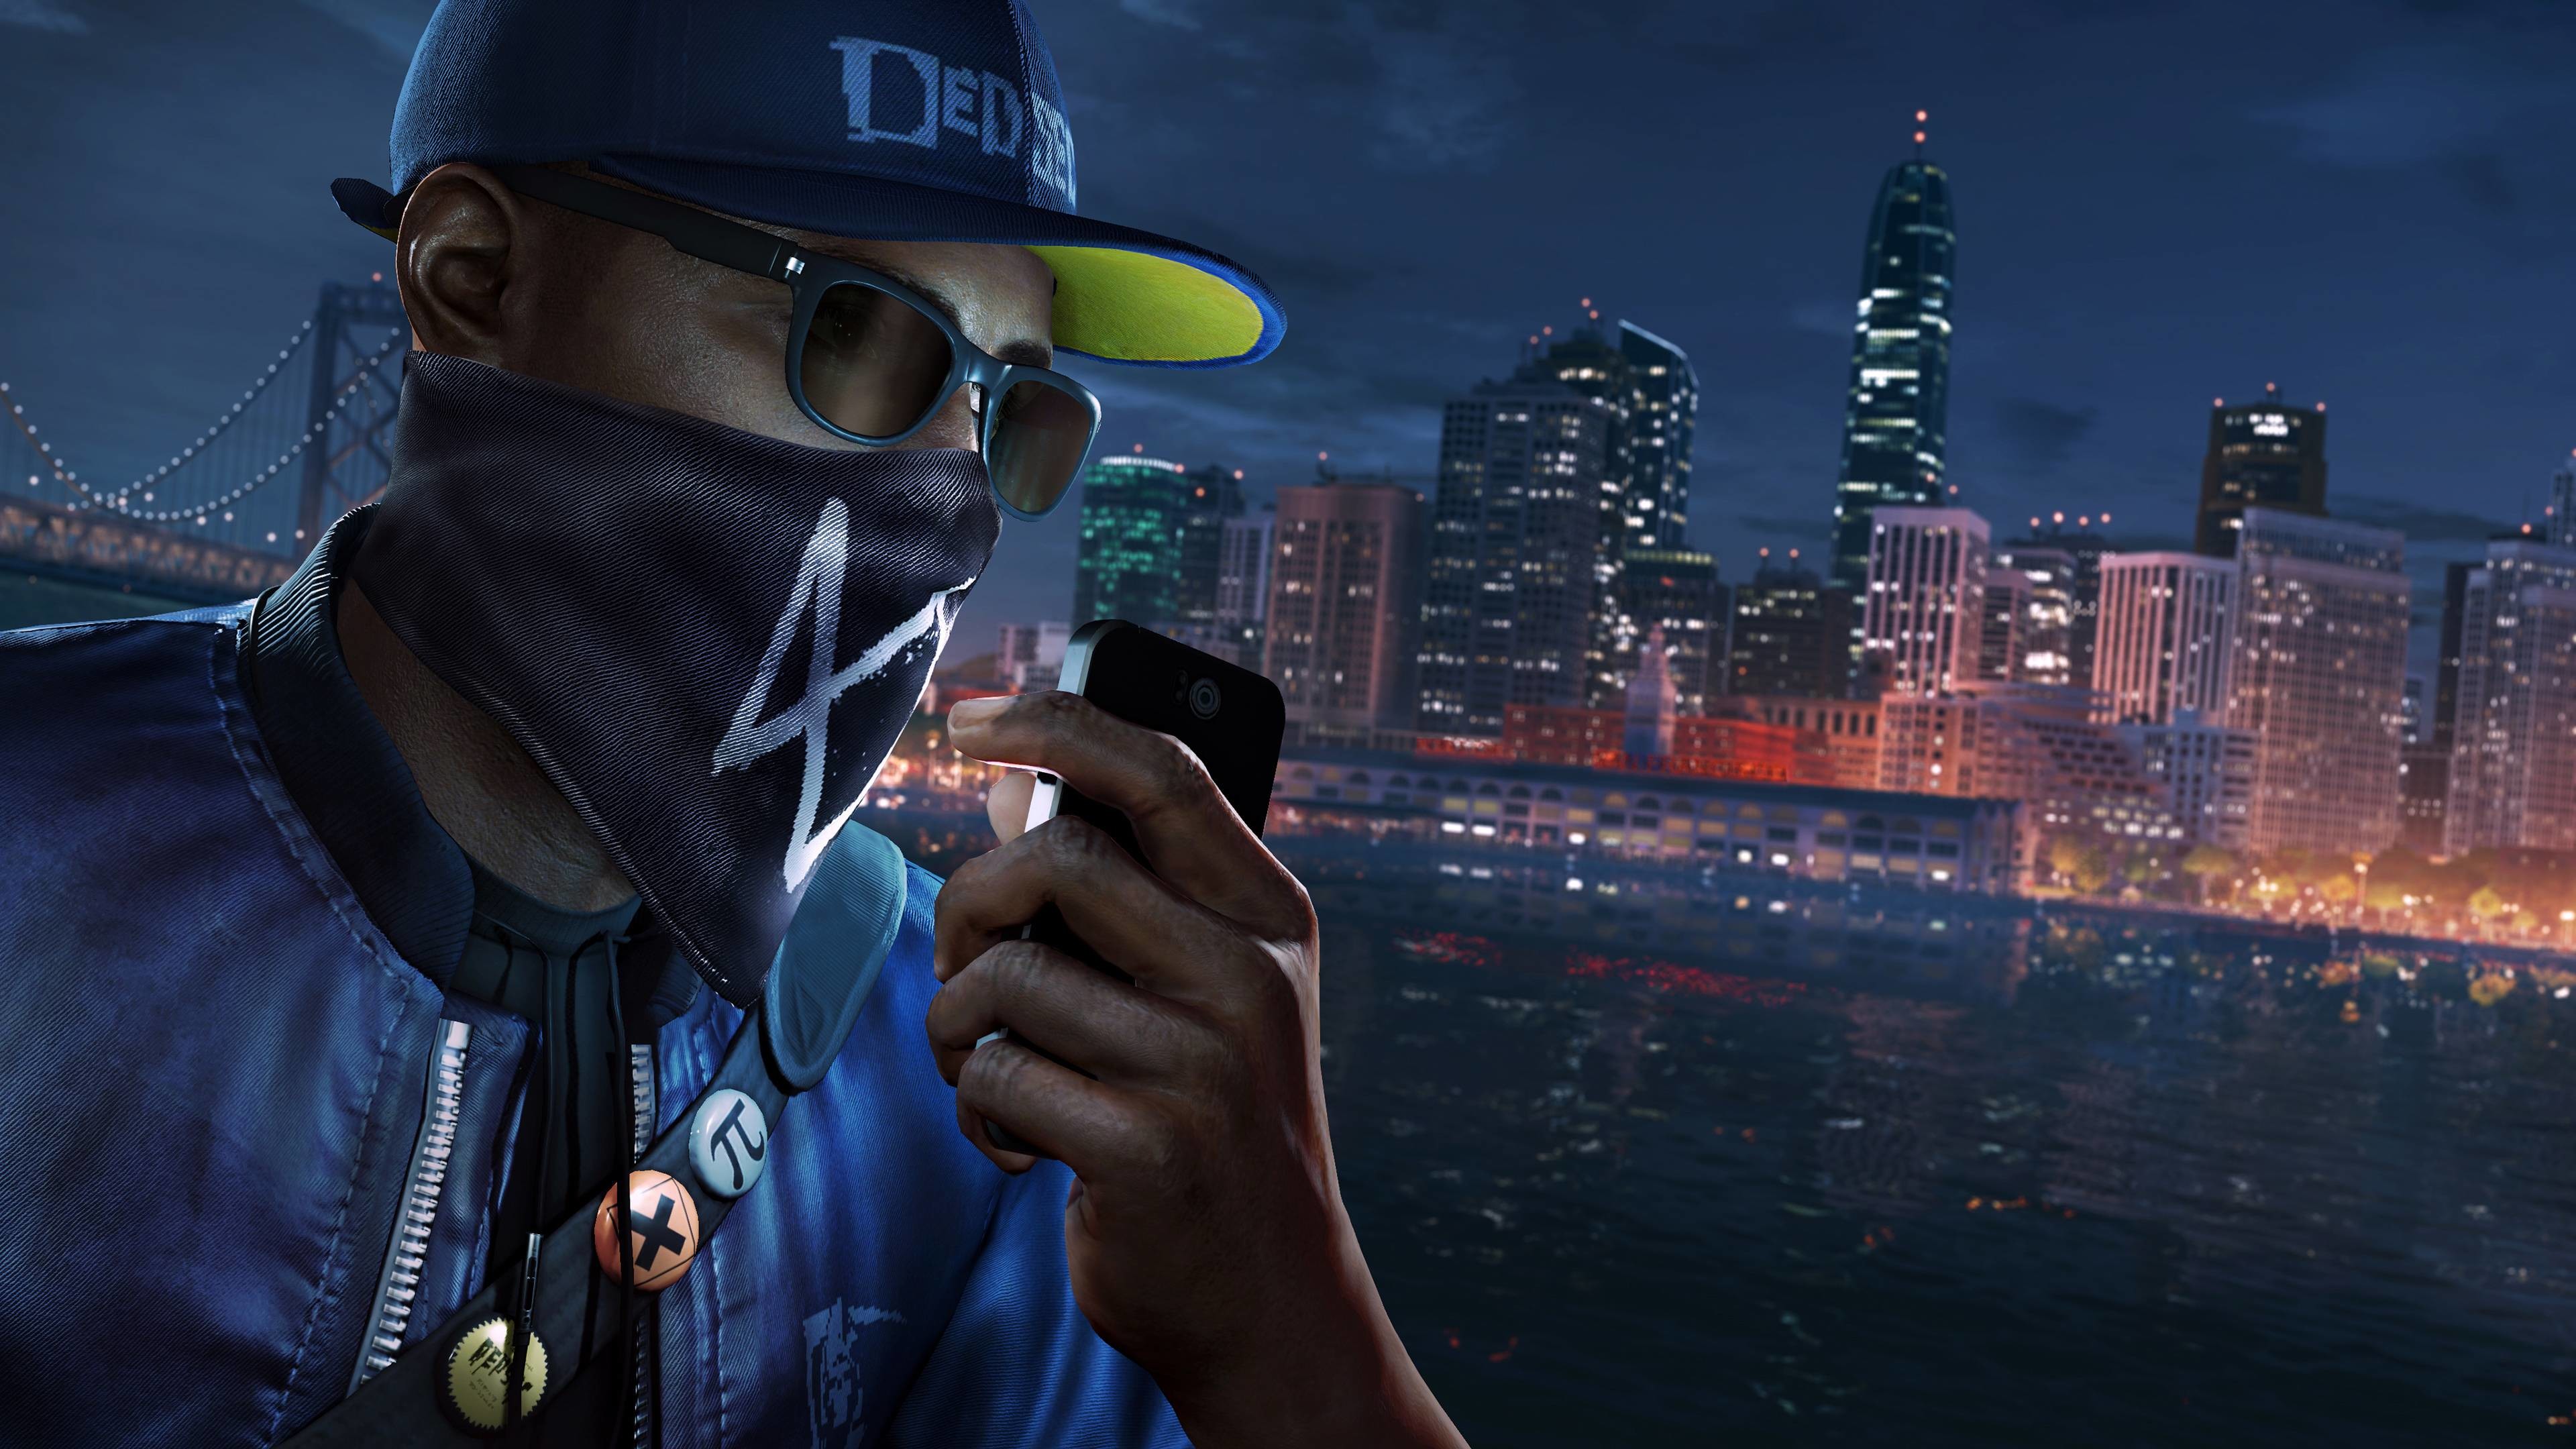 Watch Dogs Wallpapers  Watch Dogs Full HD Quality Wallpapers